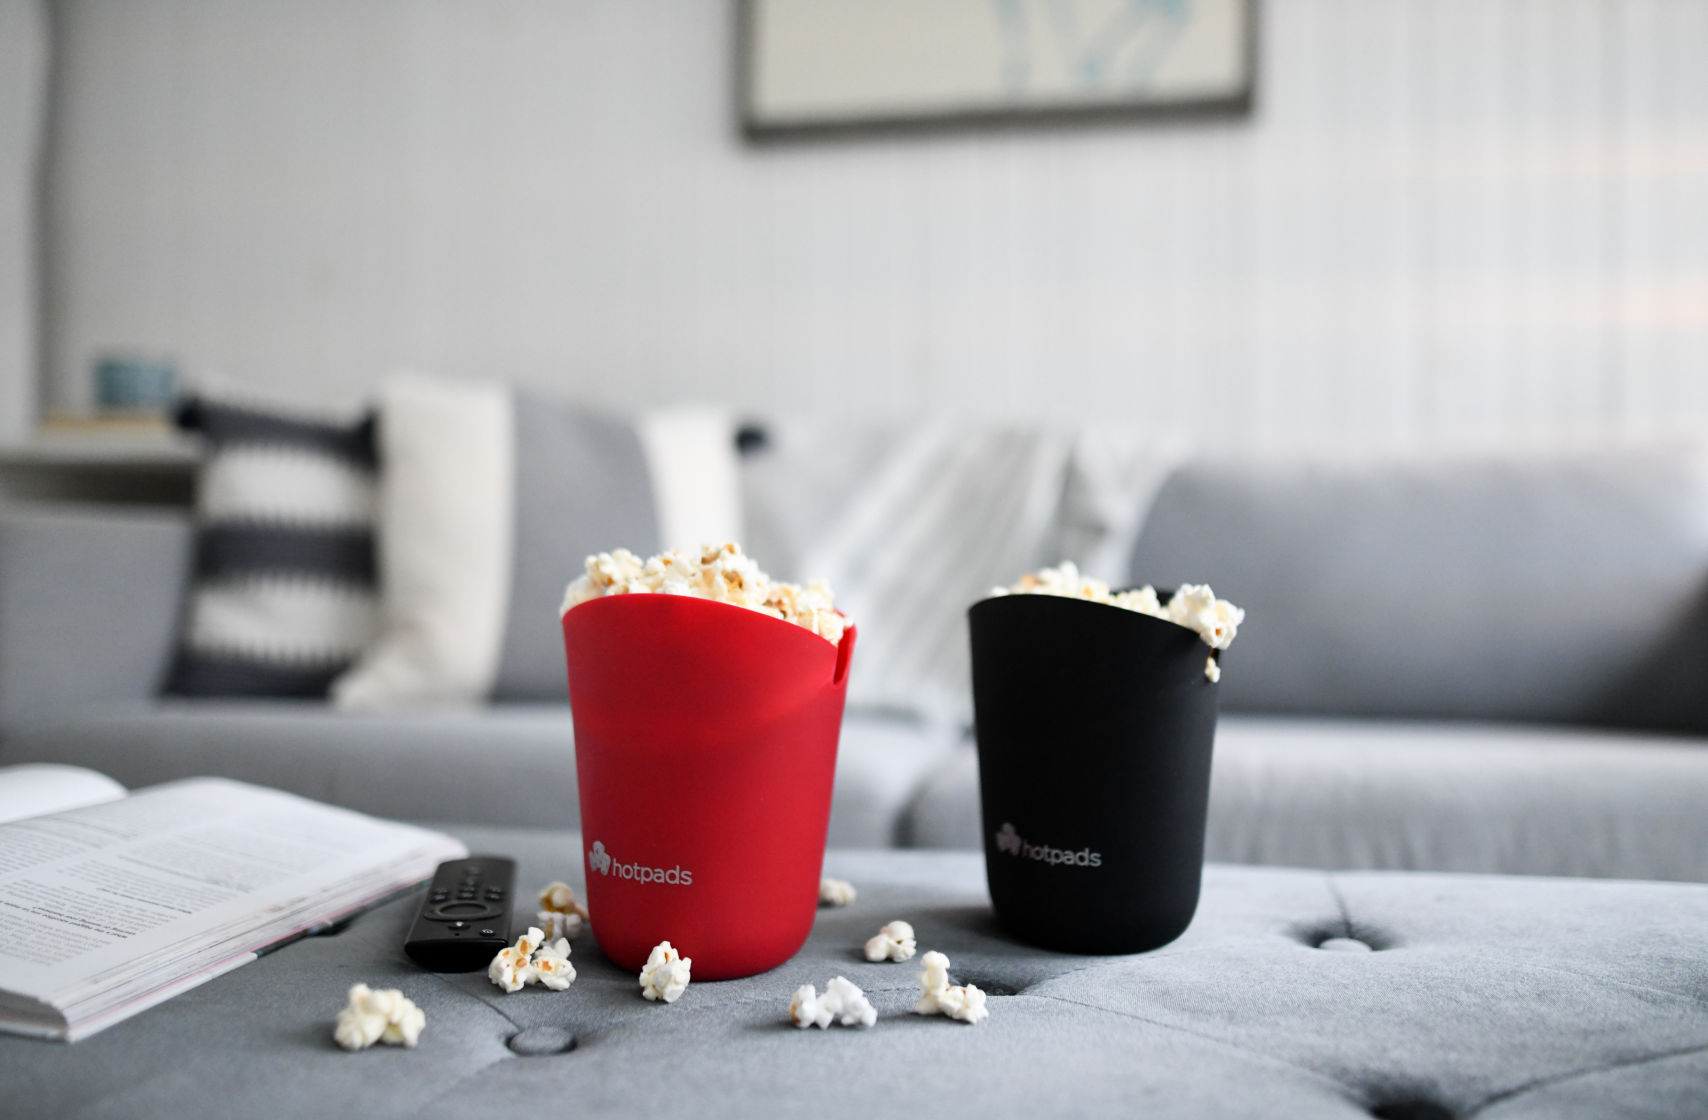 Kinetic_Promotional_Product_Services_Housewares_Food_Popcorn